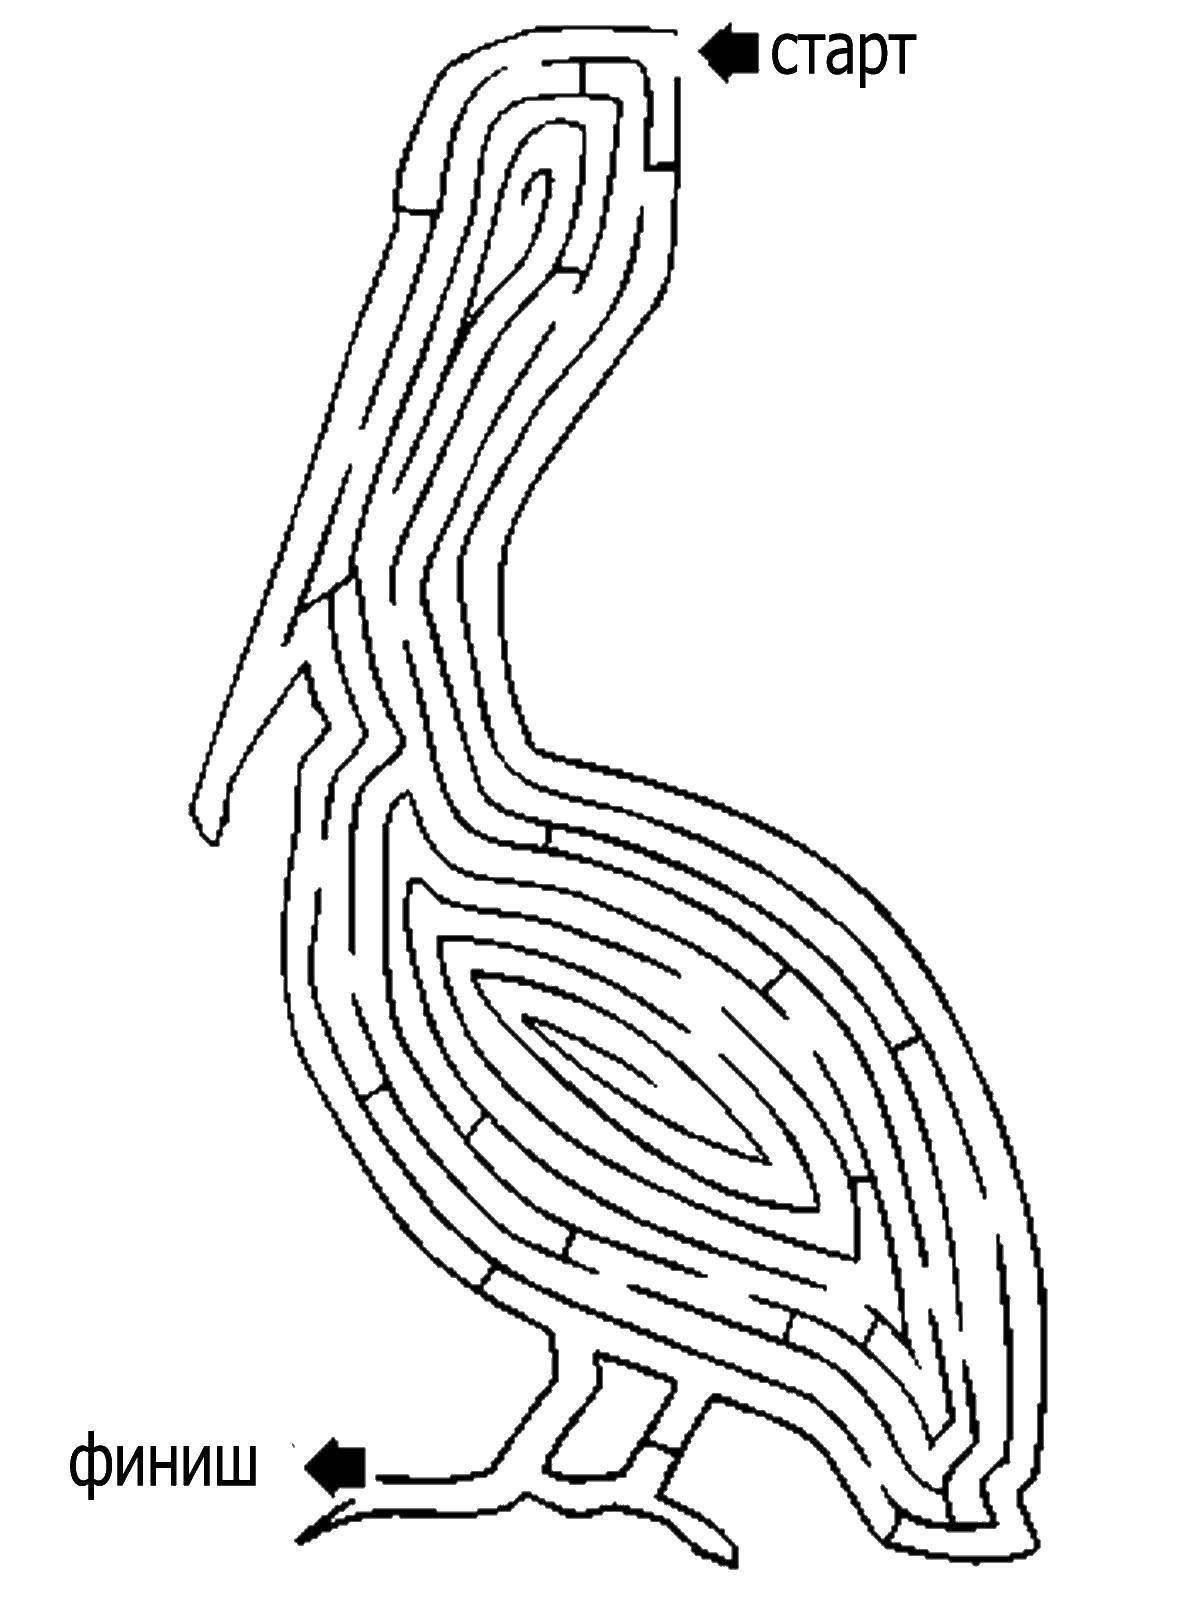 Coloring Maze. Category the labyrinth. Tags:  the labyrinth.